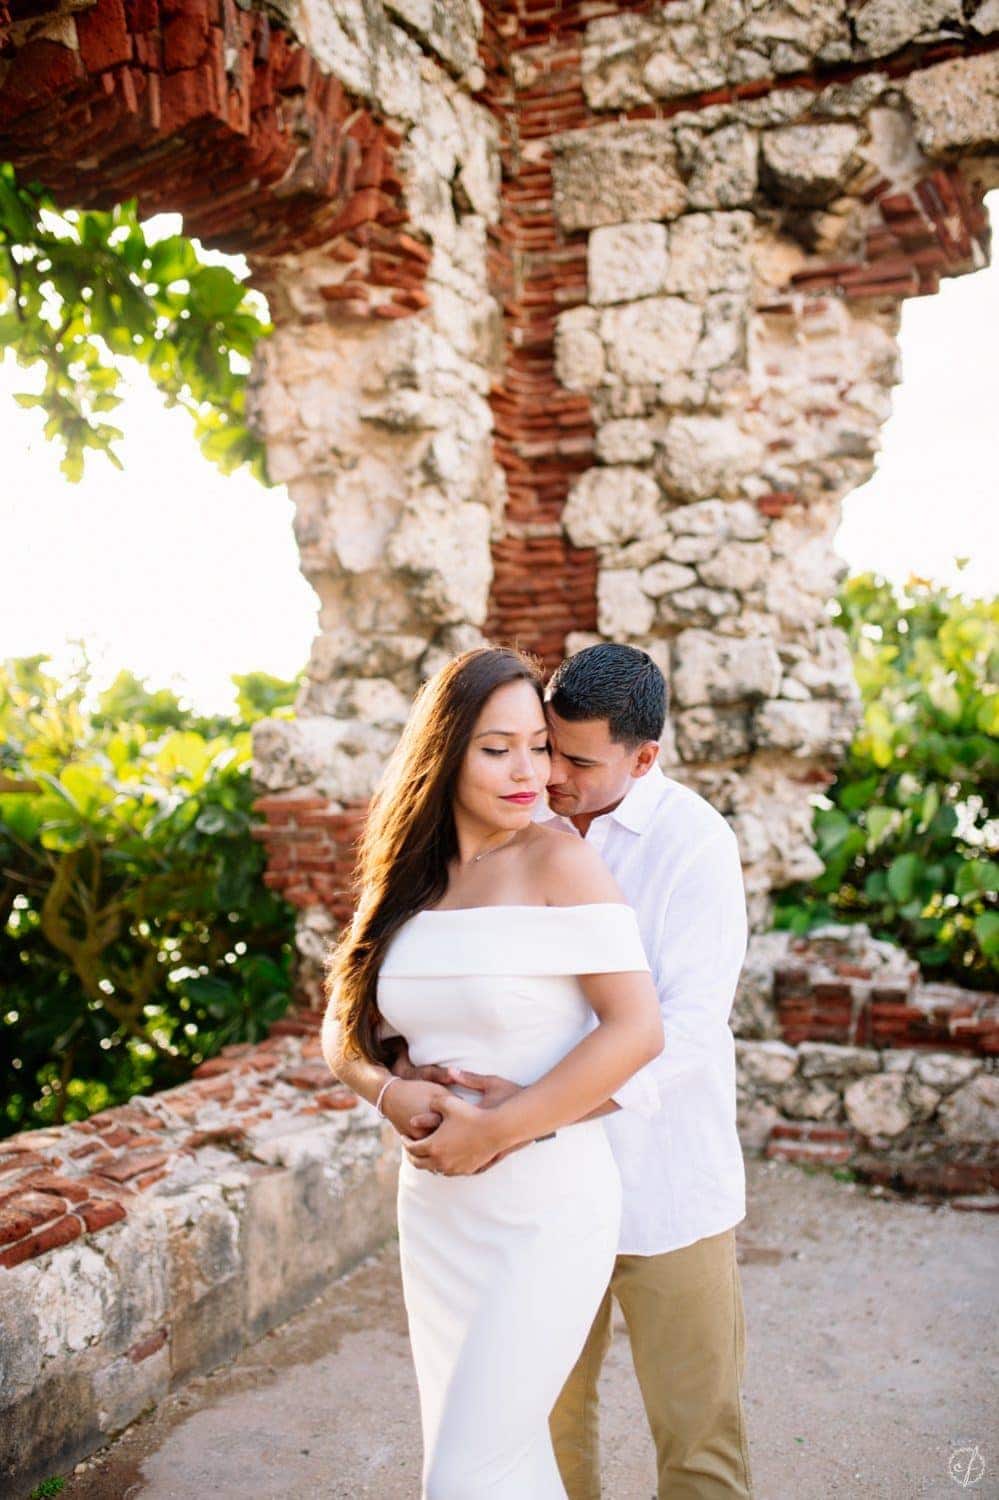 Beach photo session at Aguadilla Ruins and Borinquen Beach by Puerto Rico wedding and elopement photographer Camille Fontanez